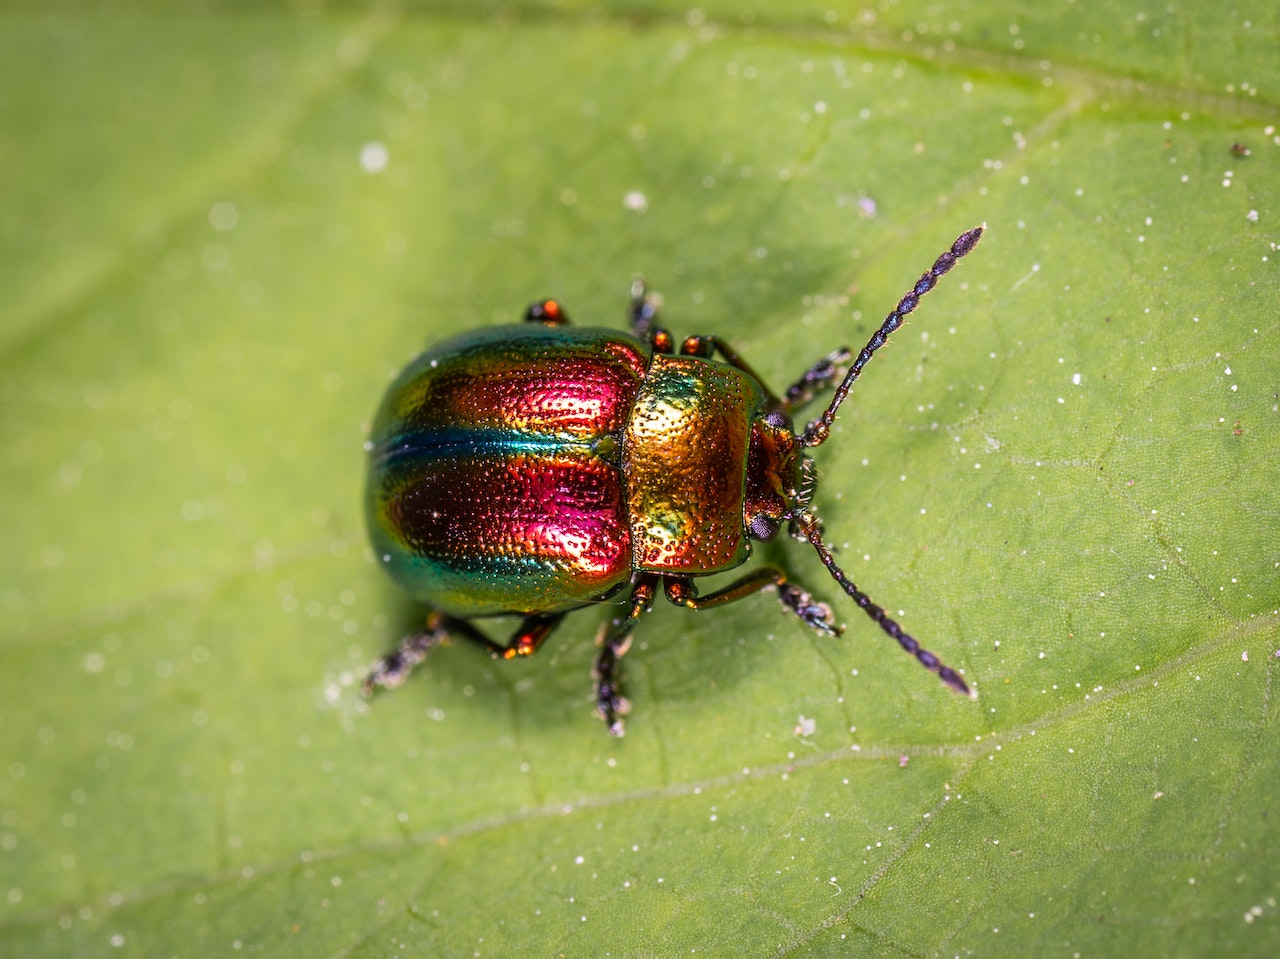 Beetle Spiritual Meaning - Understanding The Symbolism And Significance